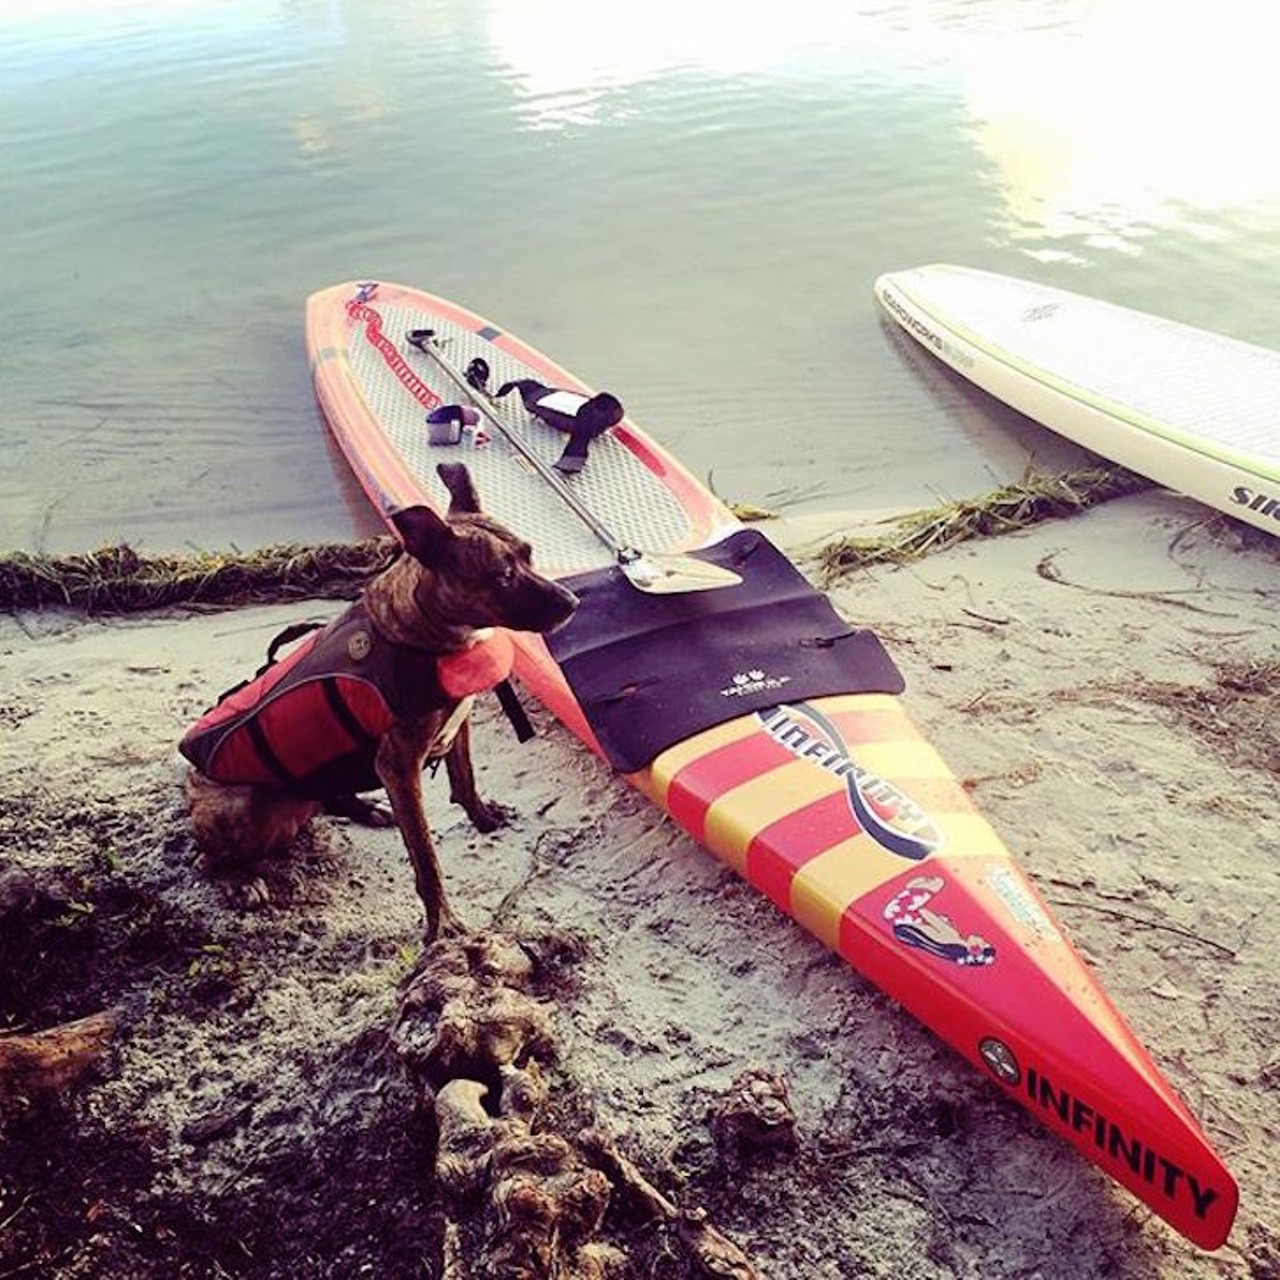 Take your dog paddle boarding 
57 NE Ivanhoe Blvd.; 407-230-4099 
Ollie Ave., Winter Park, 407-230-4099  
Bring your dog along for a special puppy paddle experience! You and your pal can paddle board at Lake Ivanhoe Park and Dinky Dock Park for $49.99, and be sure to wear your bathing suit because jumping in the water is not frowned upon. 
Photo via dontfearthesweeper/Instagram